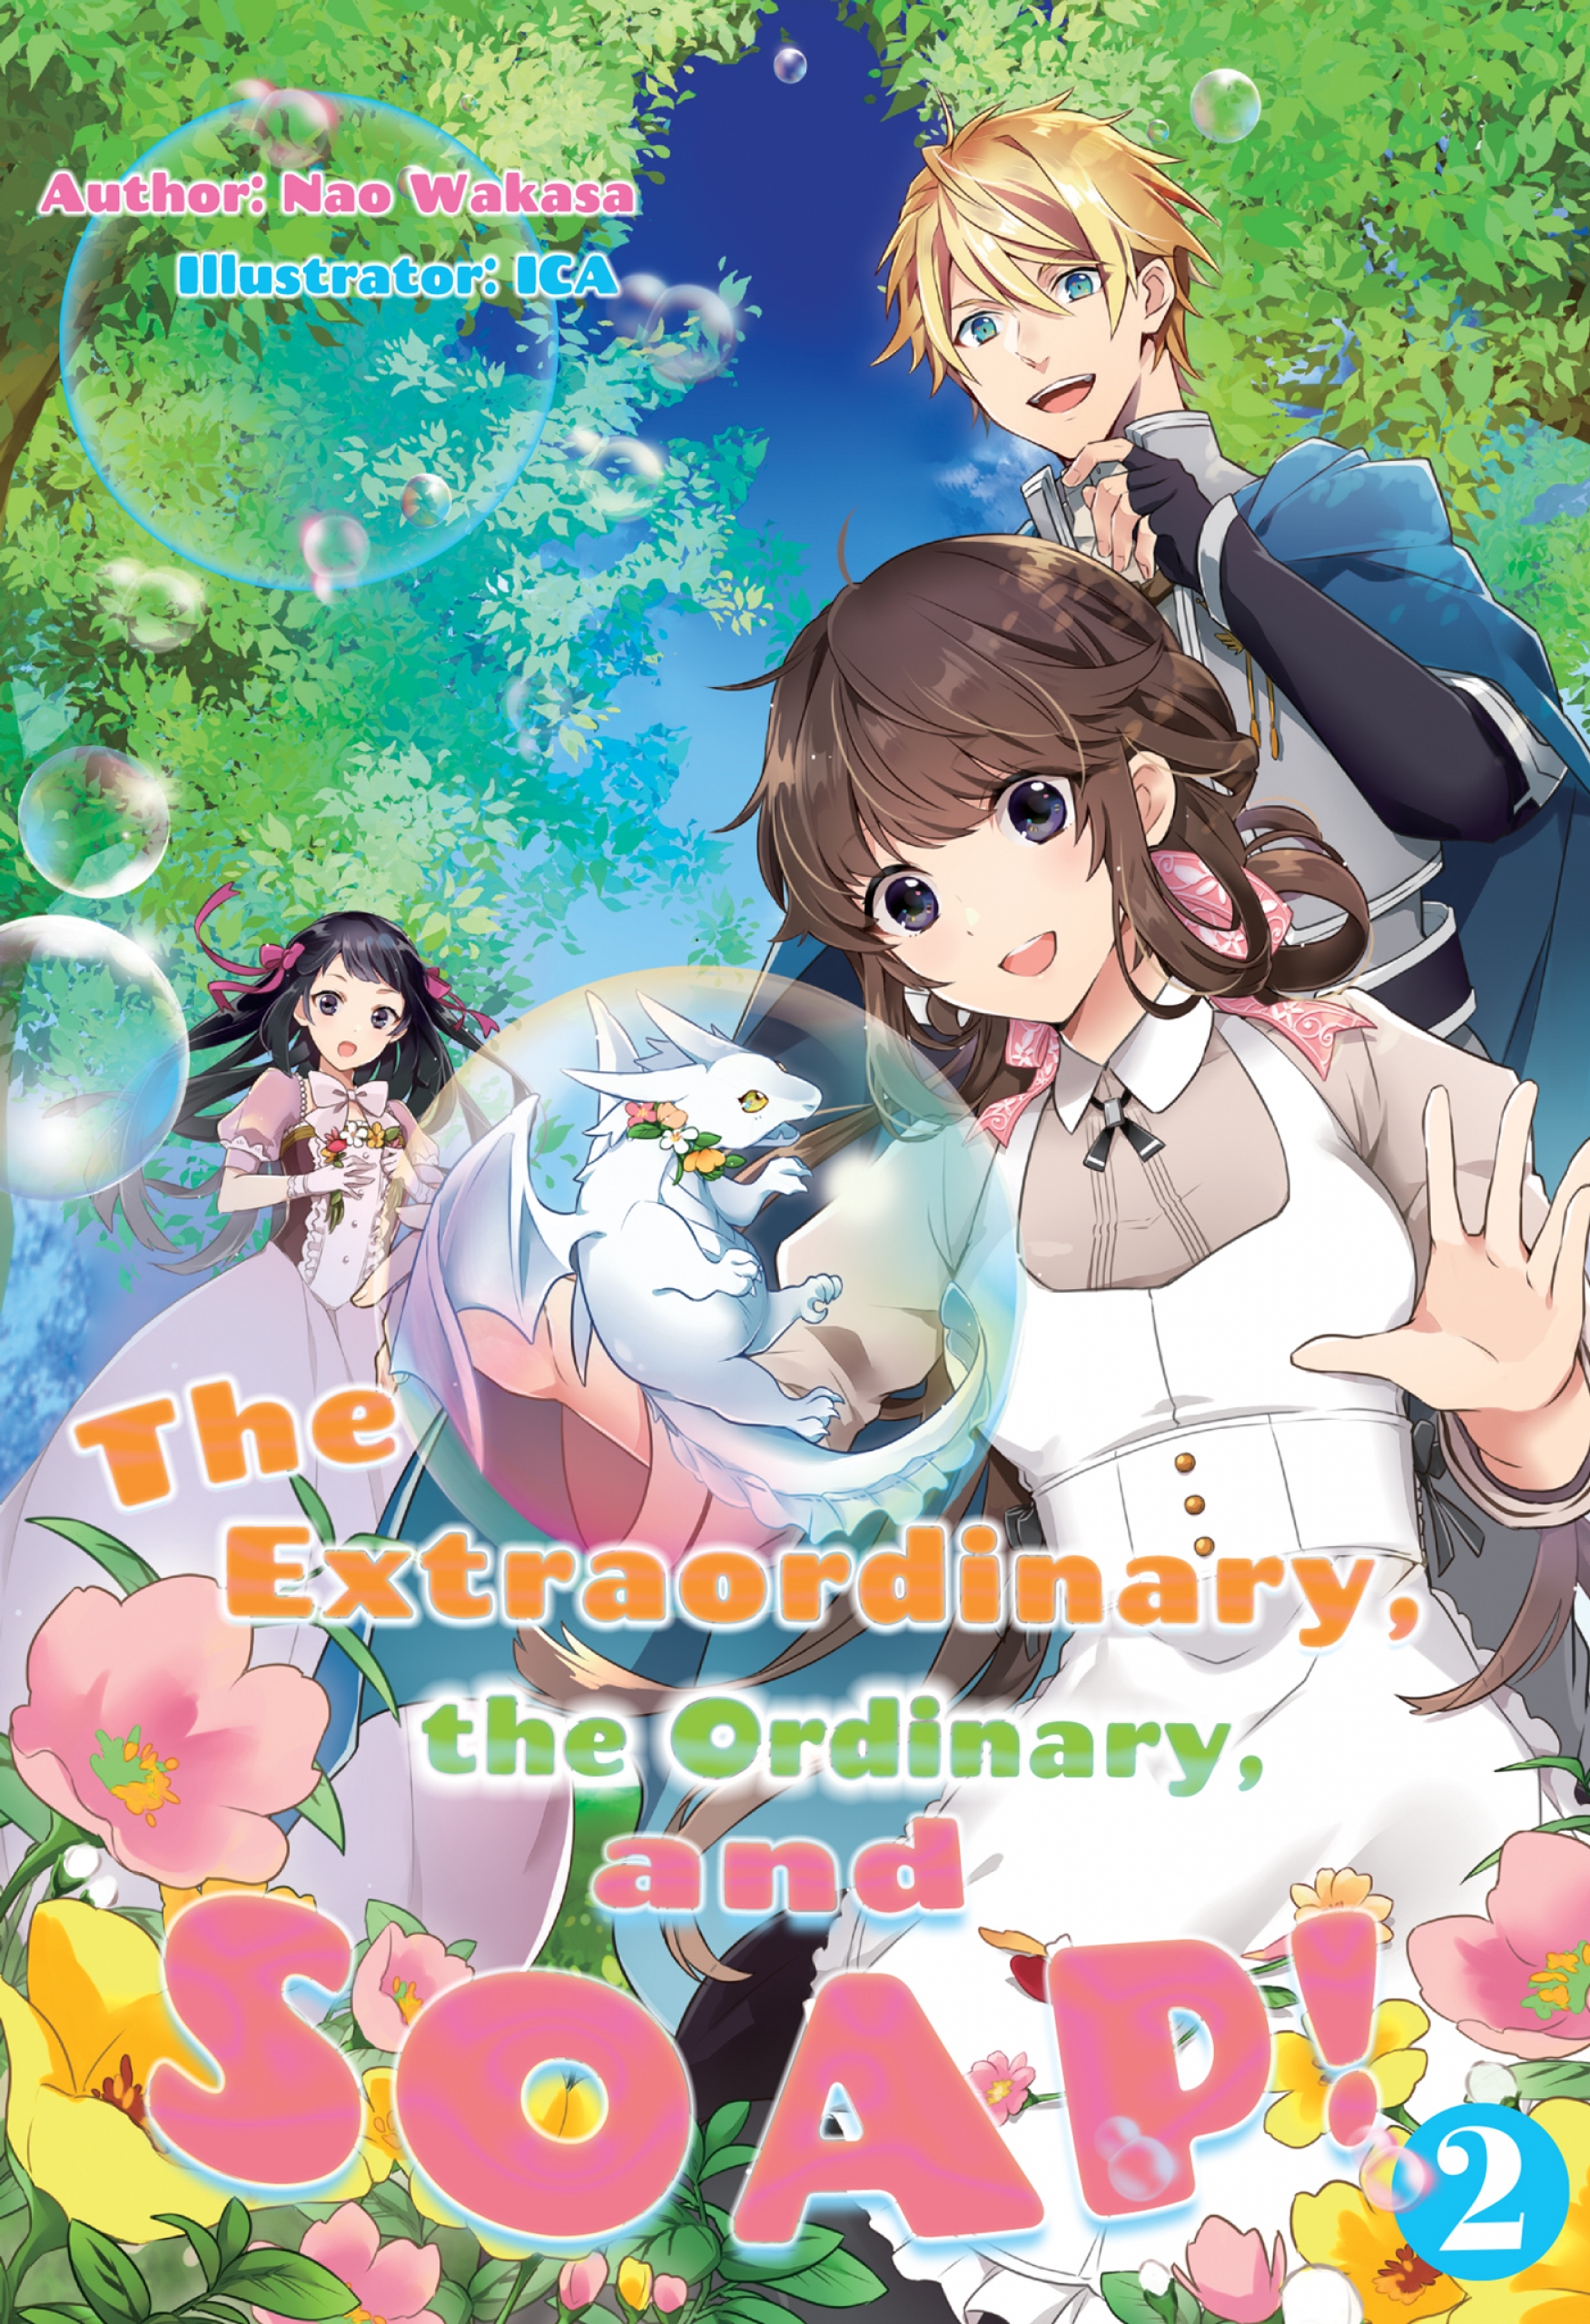 The Extraordinary, the Ordinary, and SOAP! Volume 2